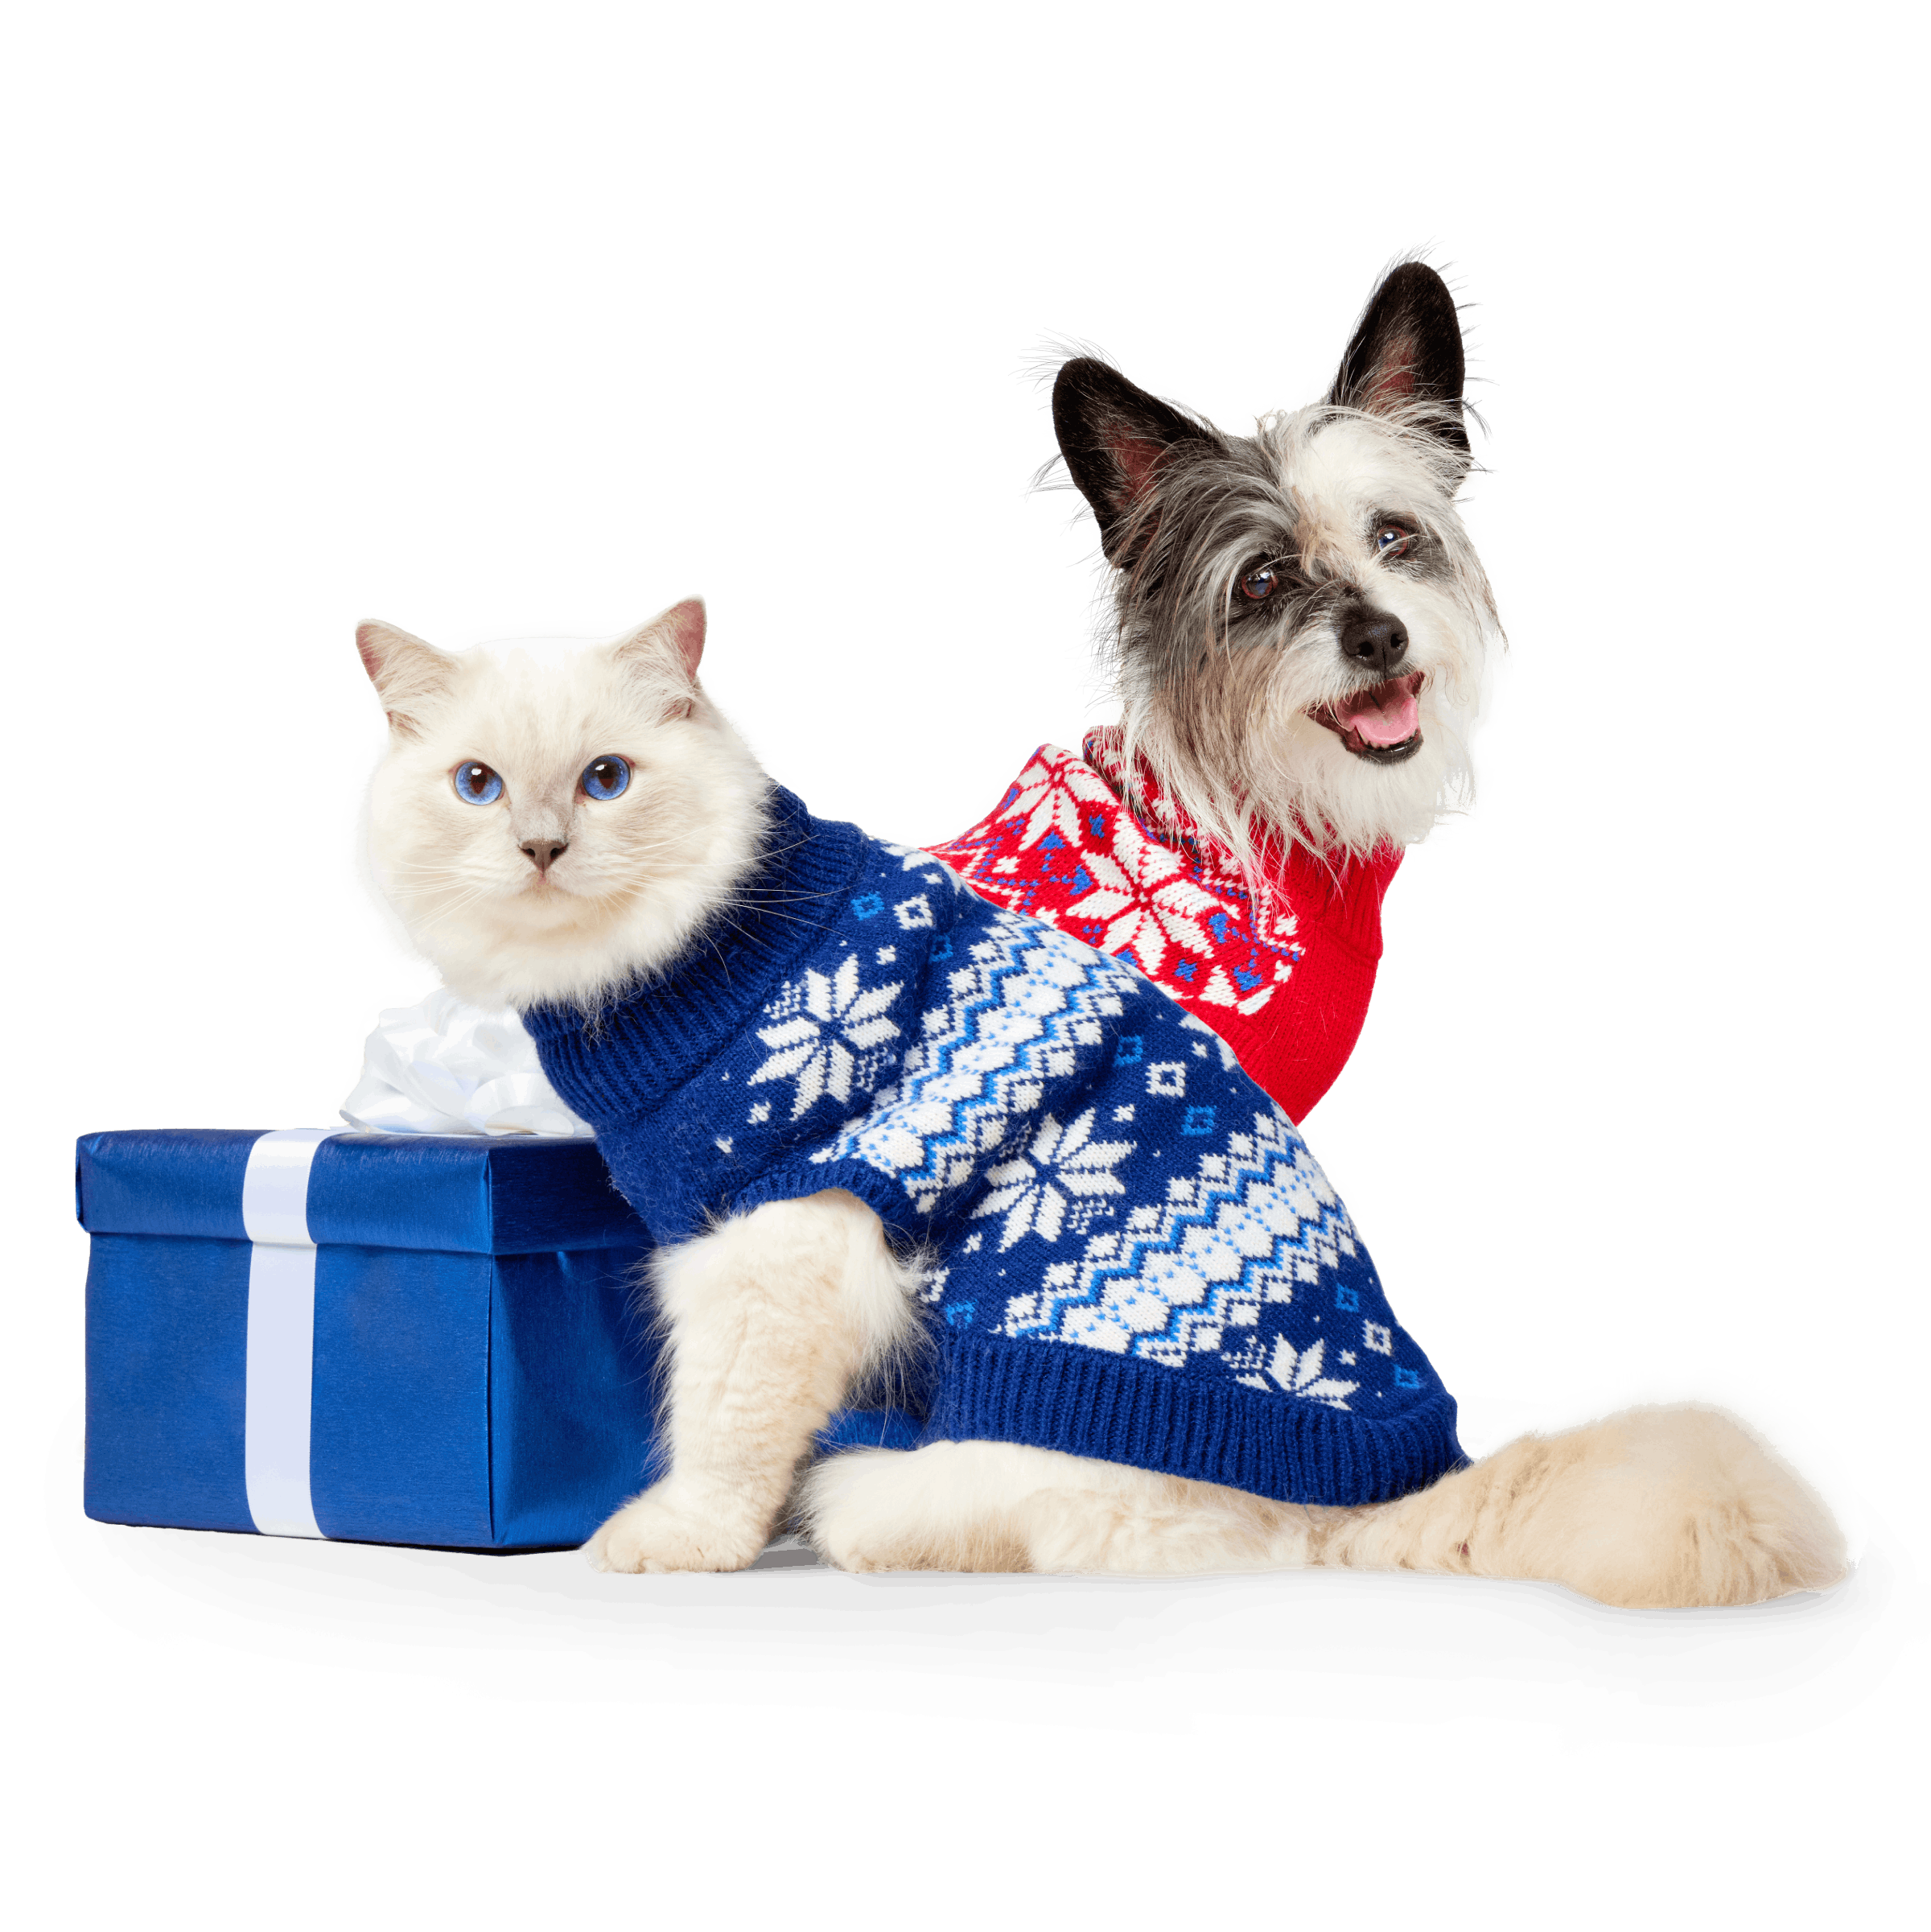 A dog and a cat in holiday sweaters next to a wrapped gift